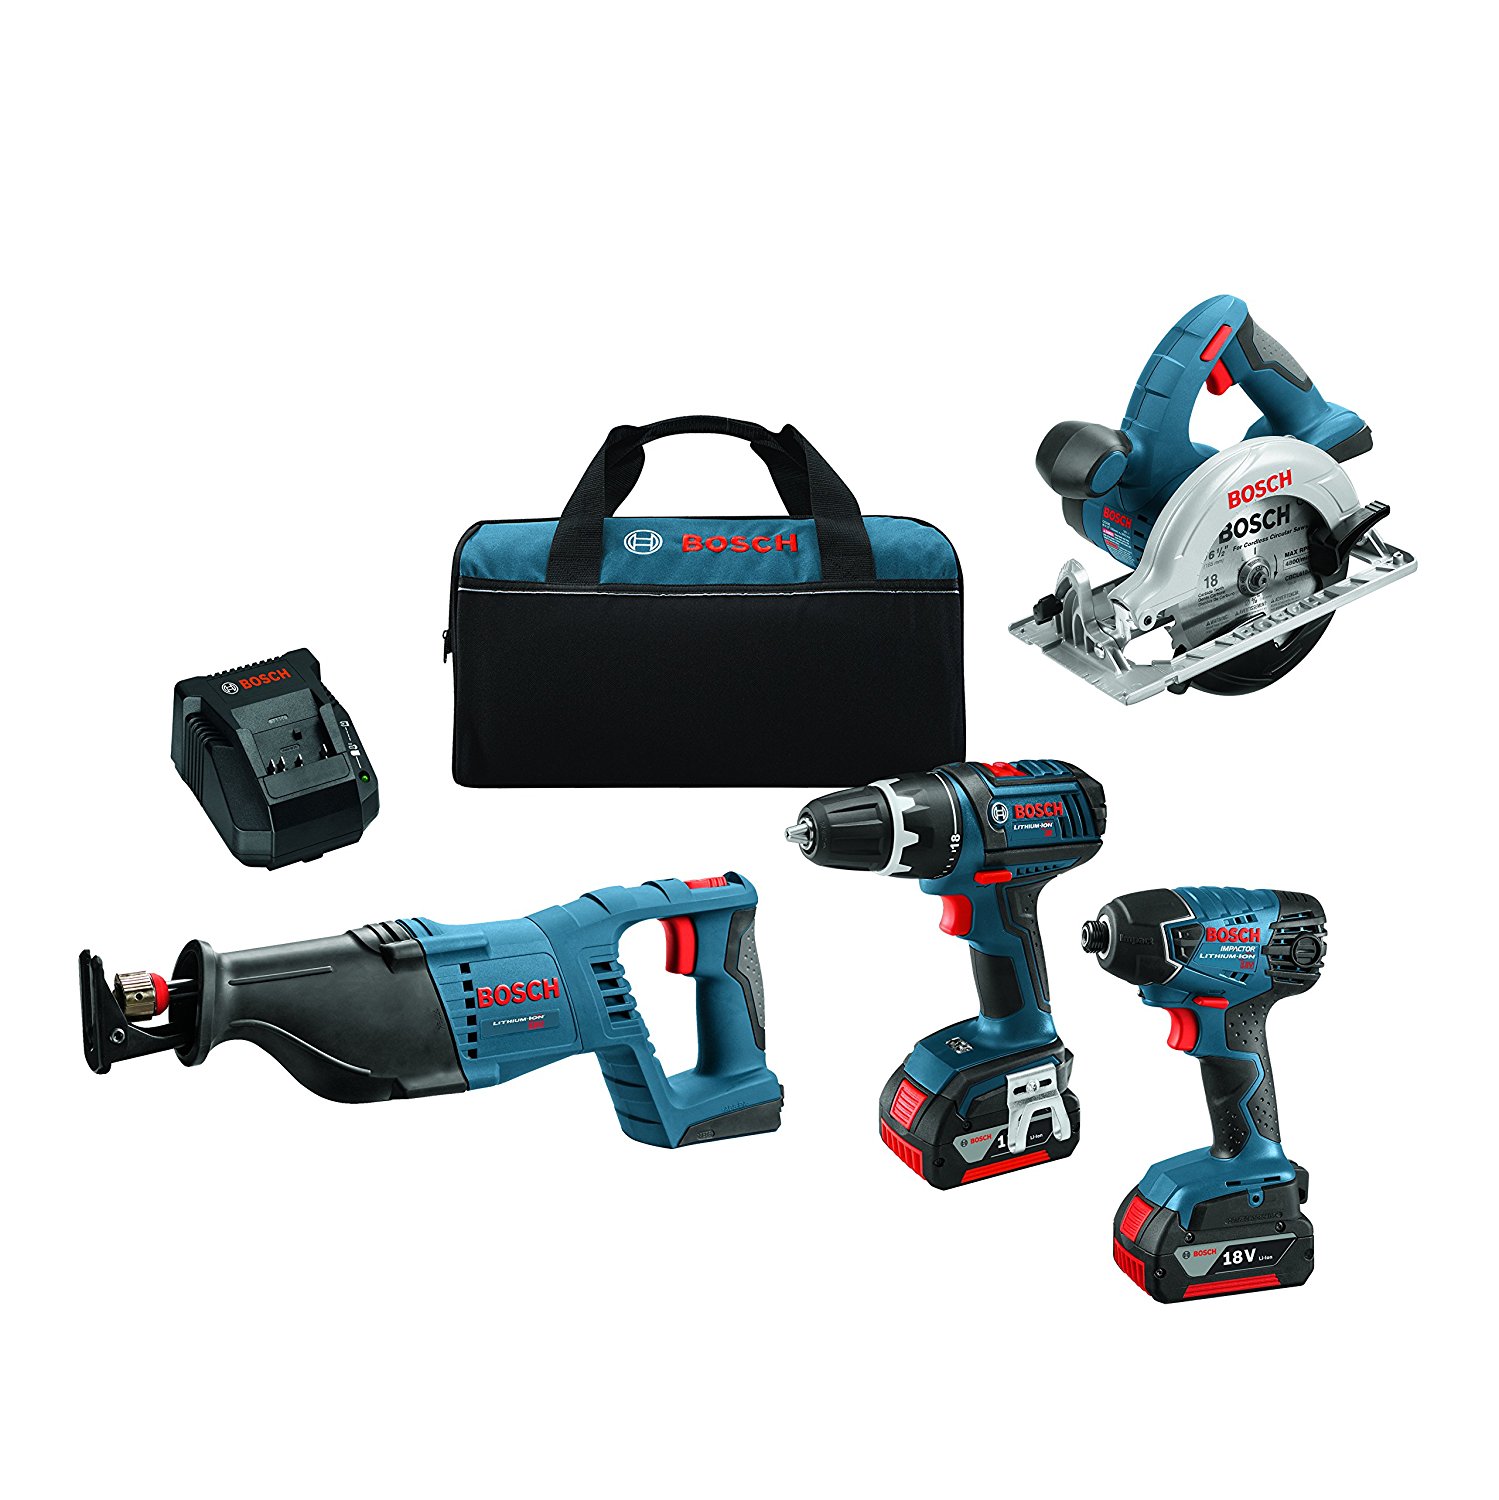 48% off Bosch 4-Tool Combo Kit – Just $285.00!